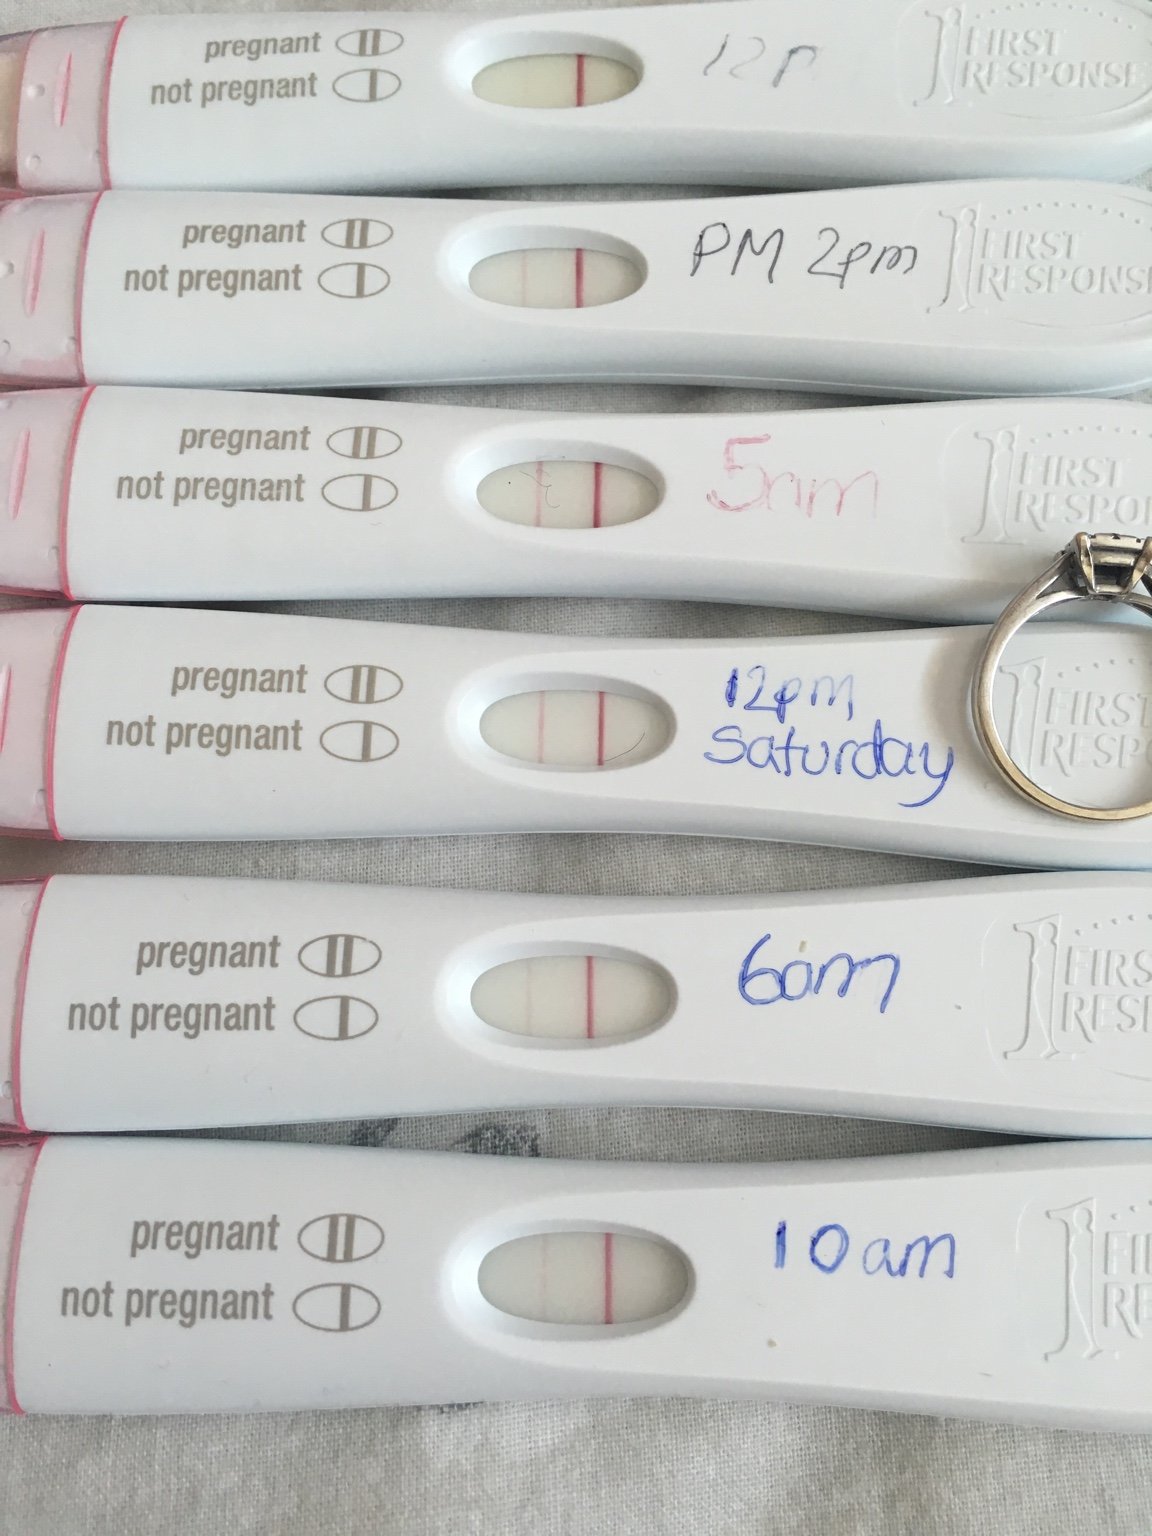 Positive Pregnancy Test After Miscarriage